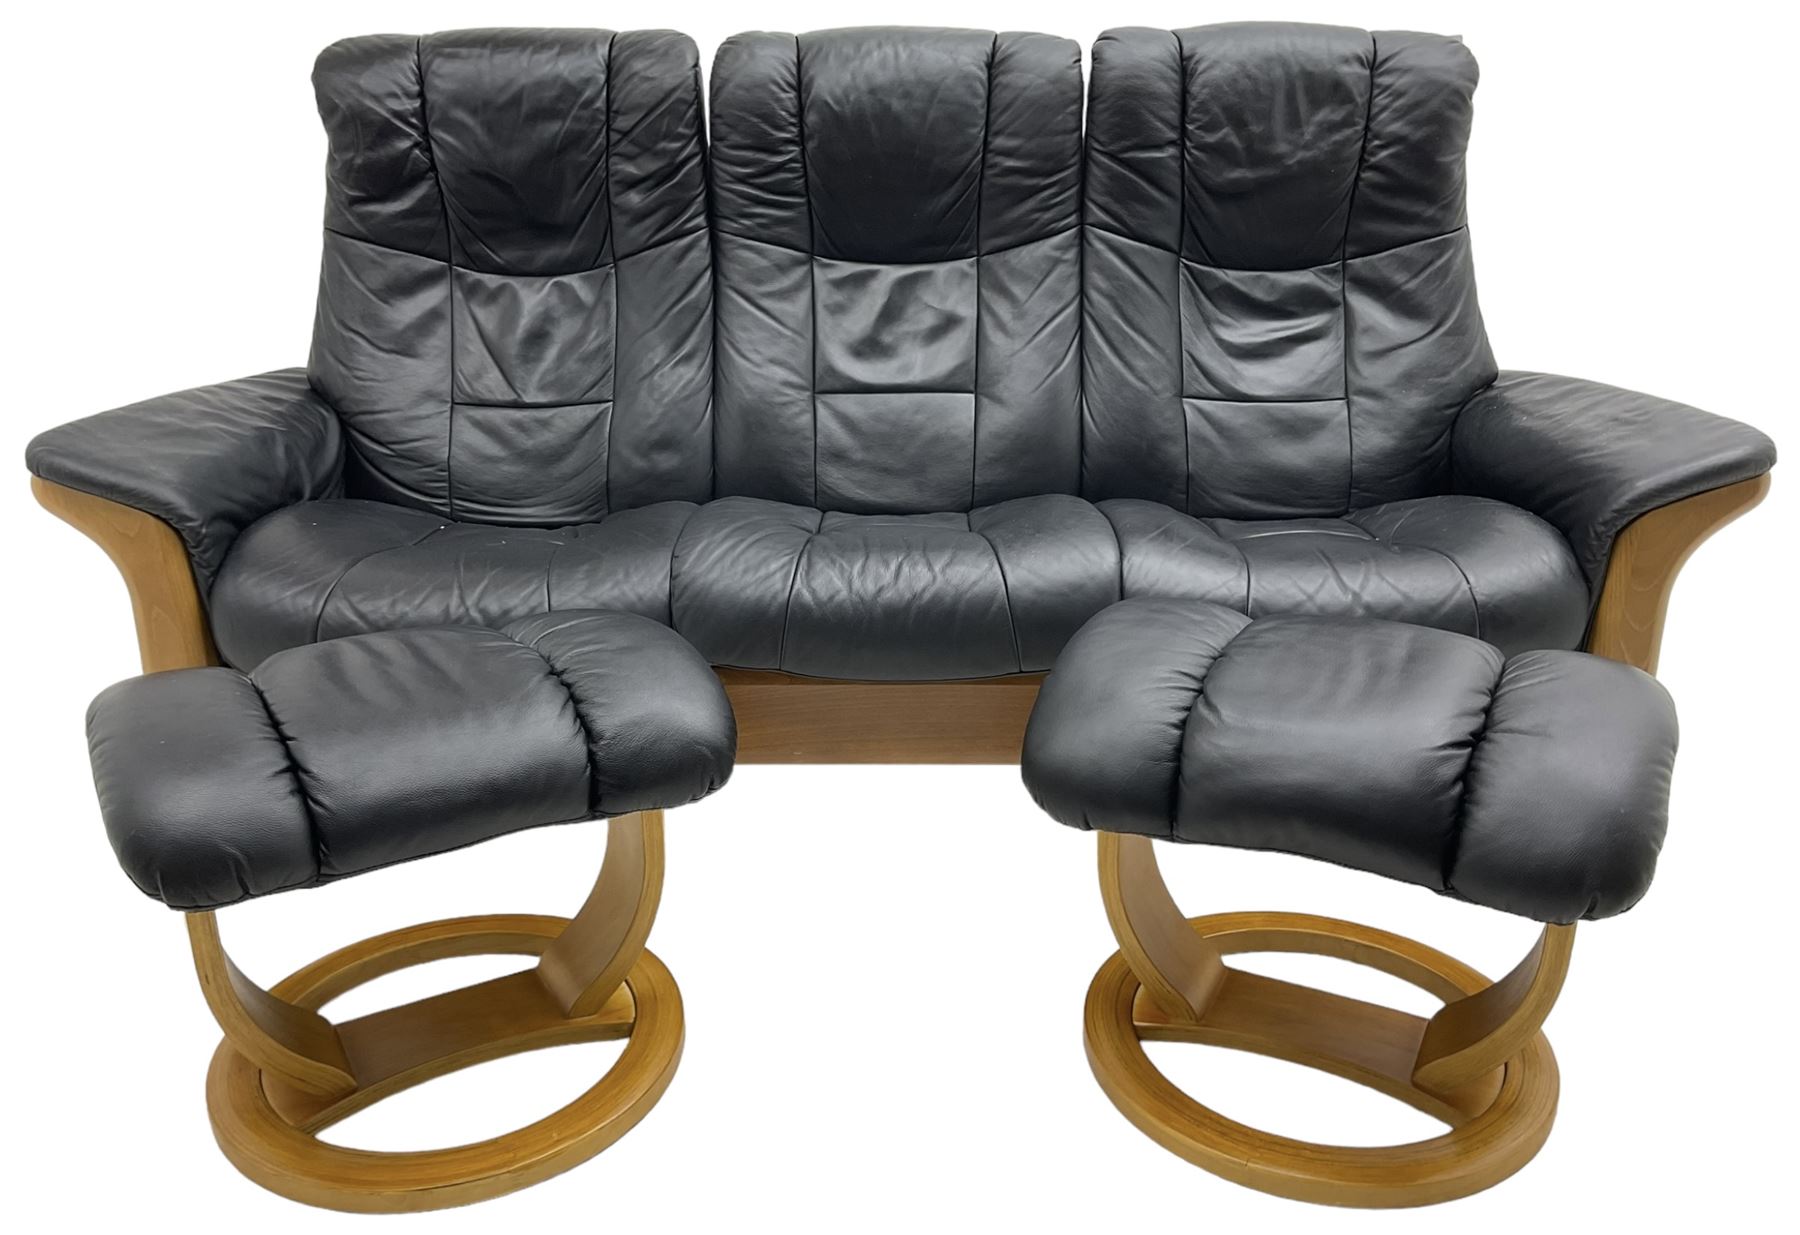 Stressless - 'Buckingham' three-seat settee upholstered in black leather; together with two associat - Image 2 of 6